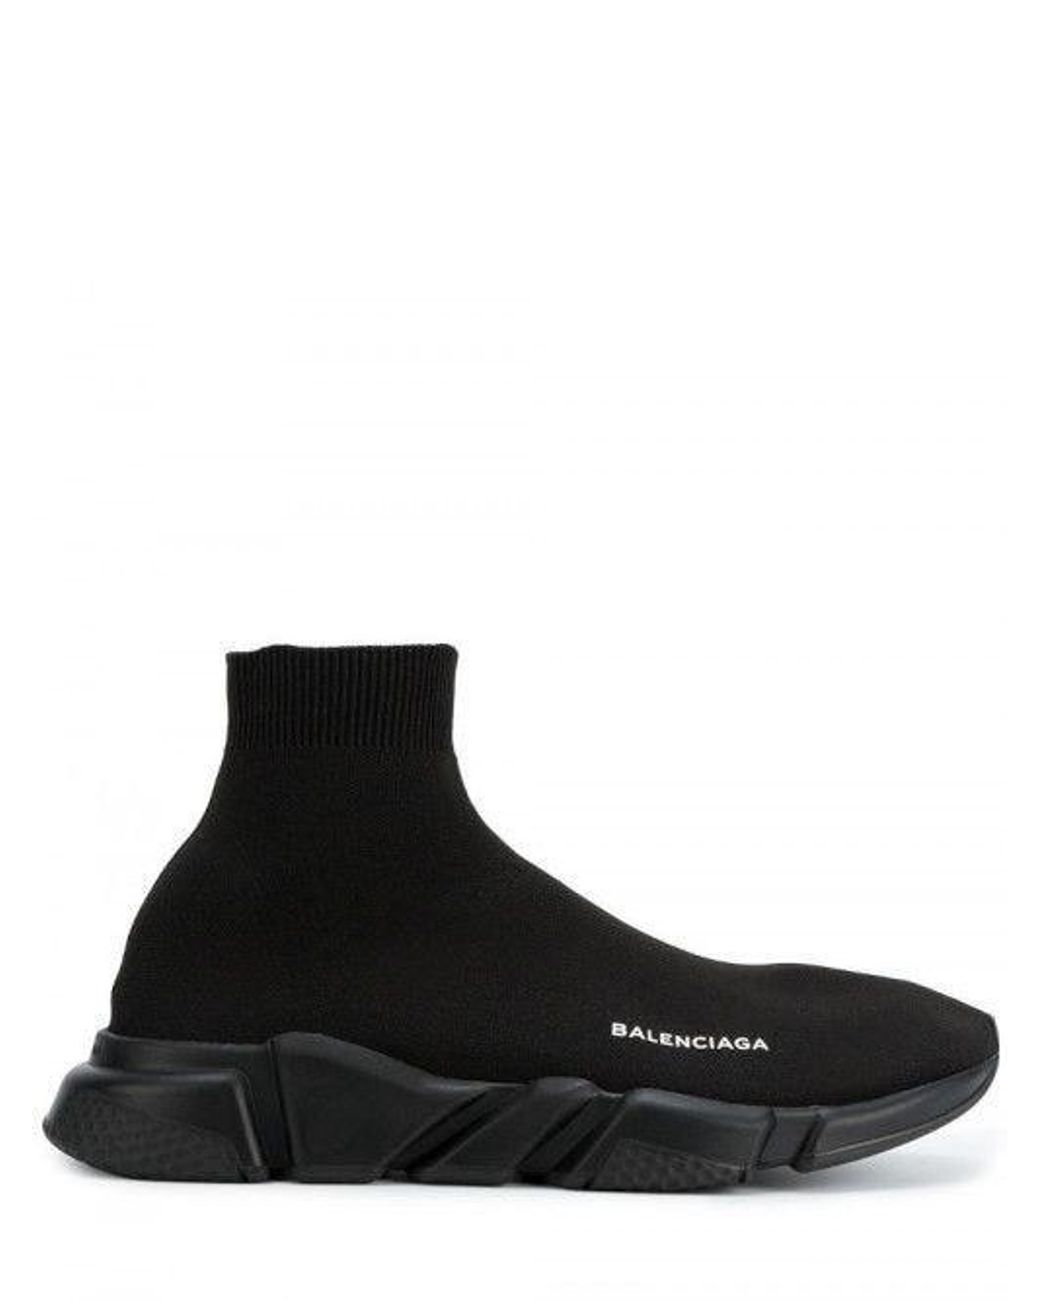 Balenciaga Speed Sneaker In Black Recycled Knit - Lyst